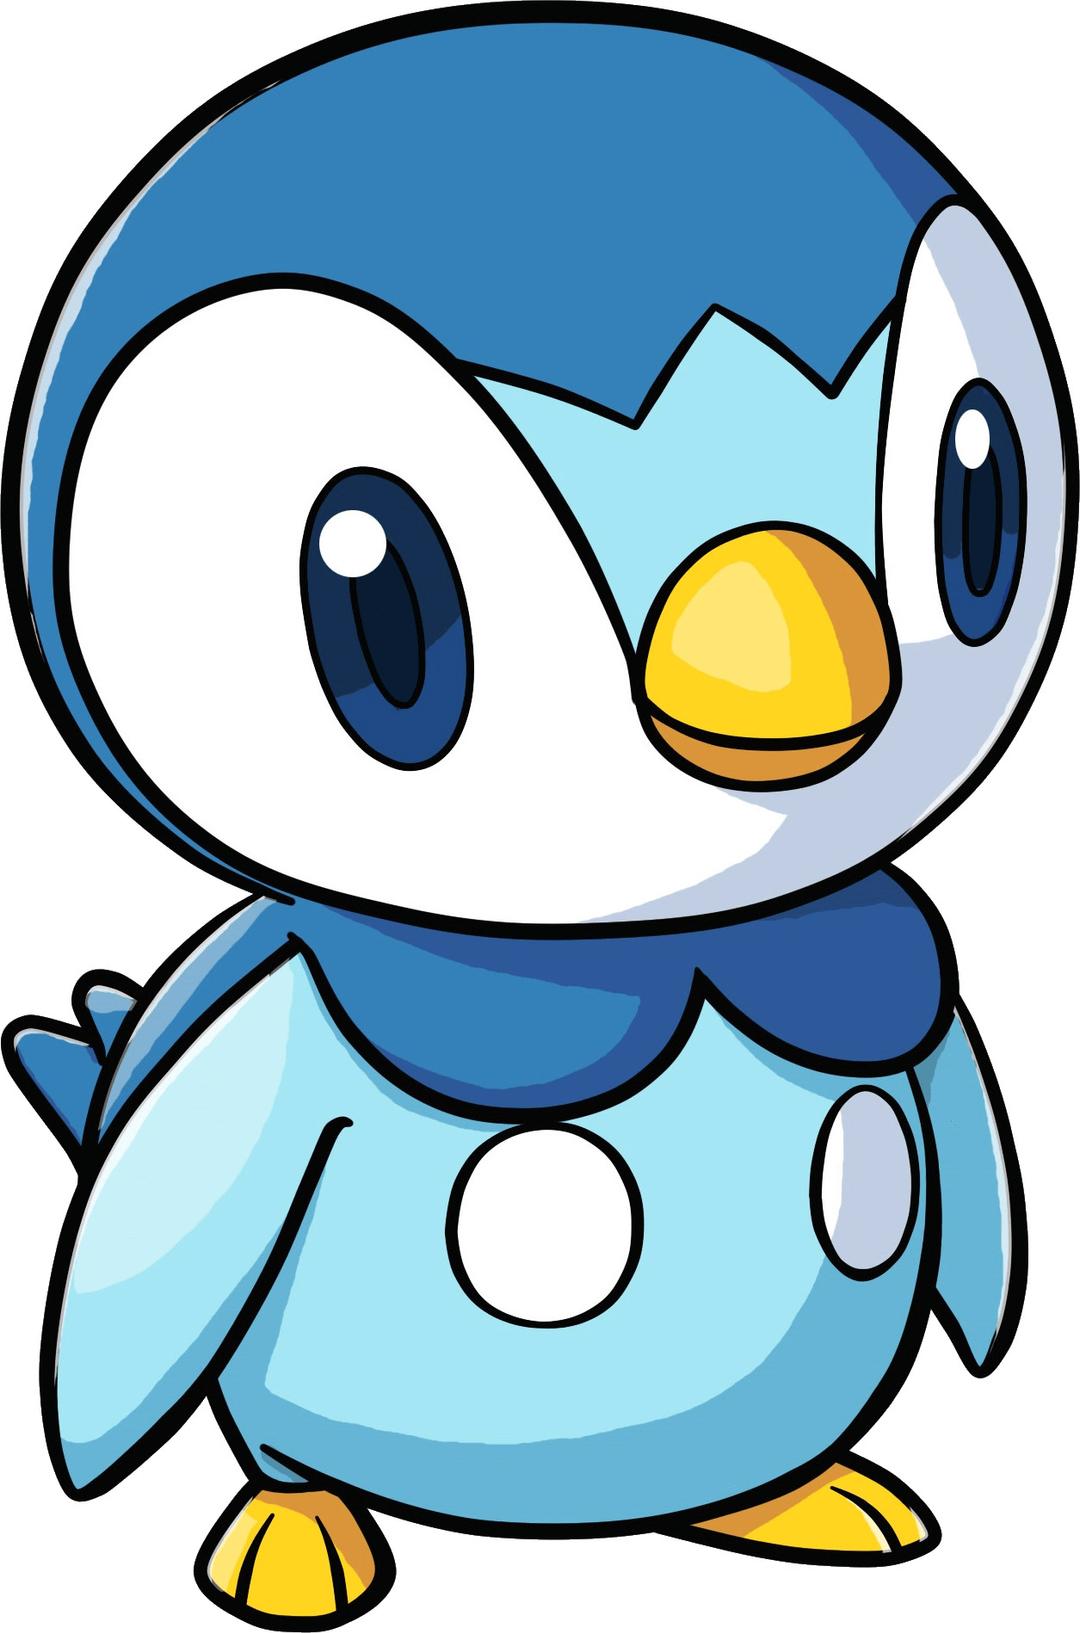 Piplup Pokemon png transparent